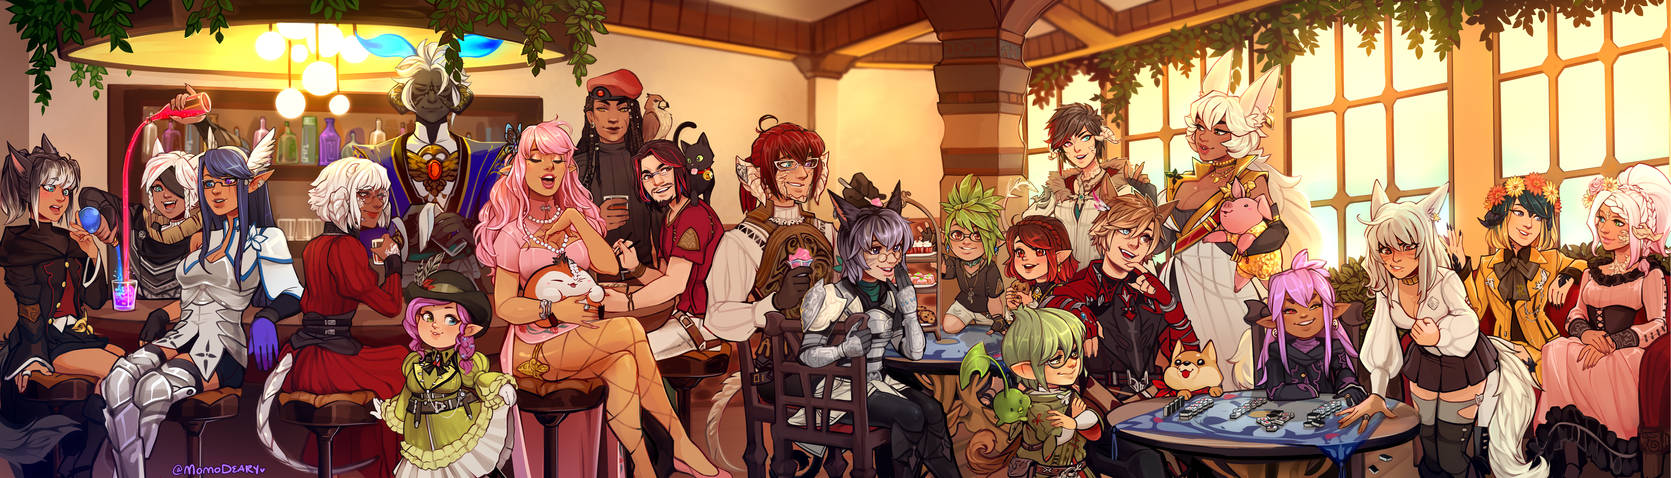 co: Knights of the Abyss Cafe